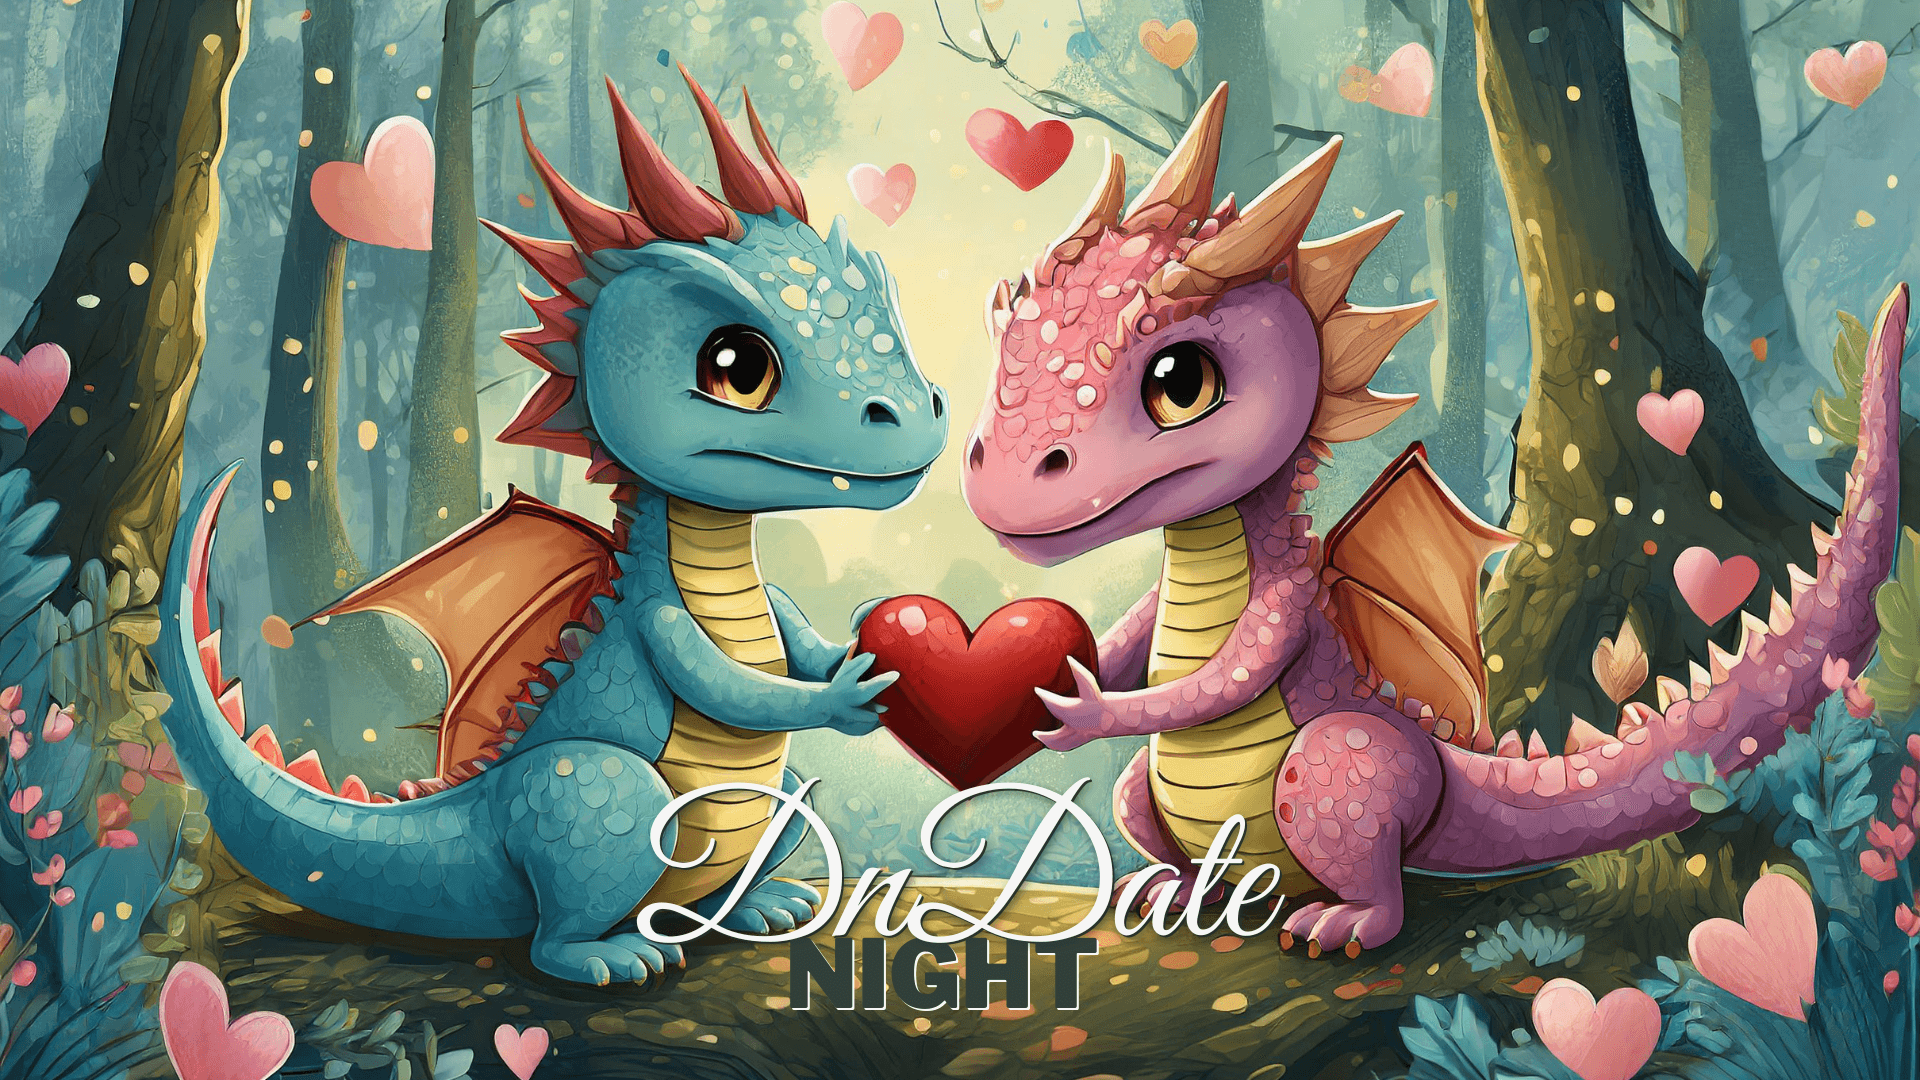 DnDate Night, two dragons holding a Valentines Day heart